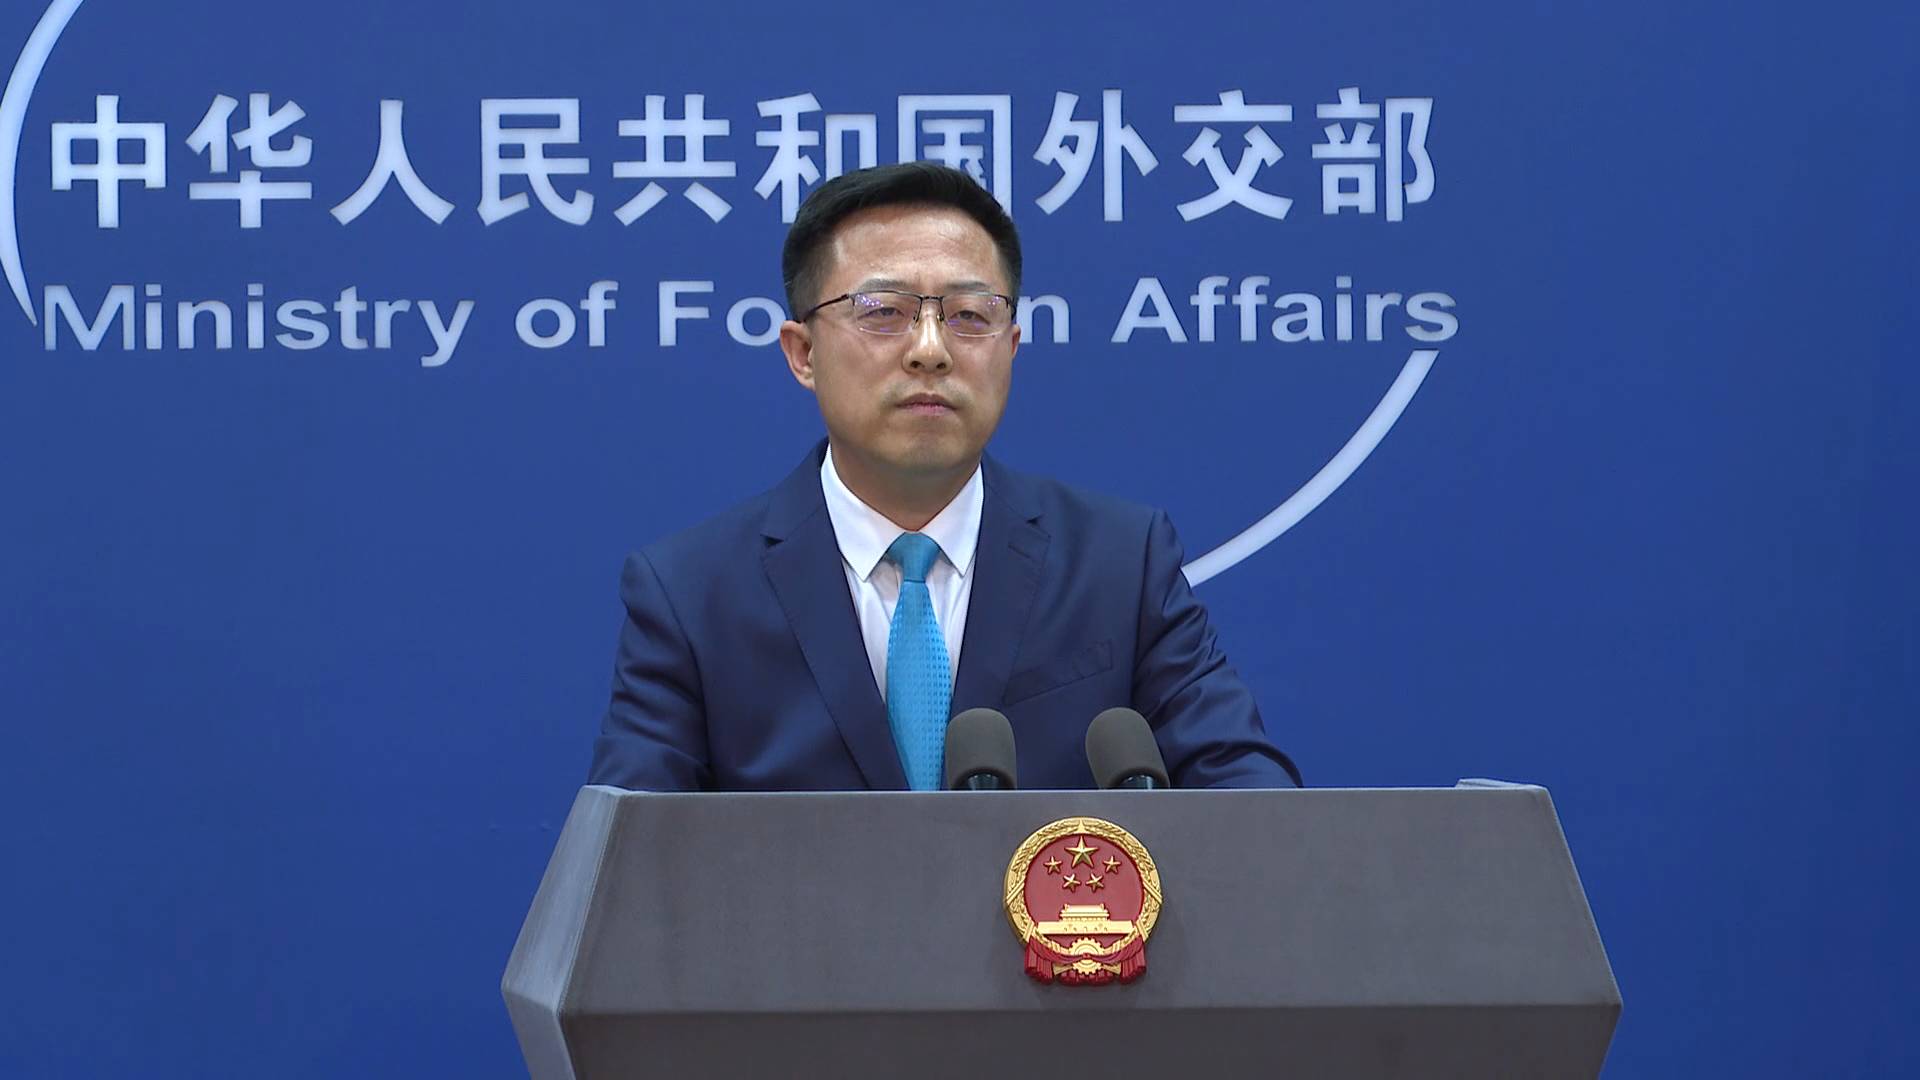 GLOBALink | "Forced labor" label should be pinned on the U.S.: Chinese FM spokesperson